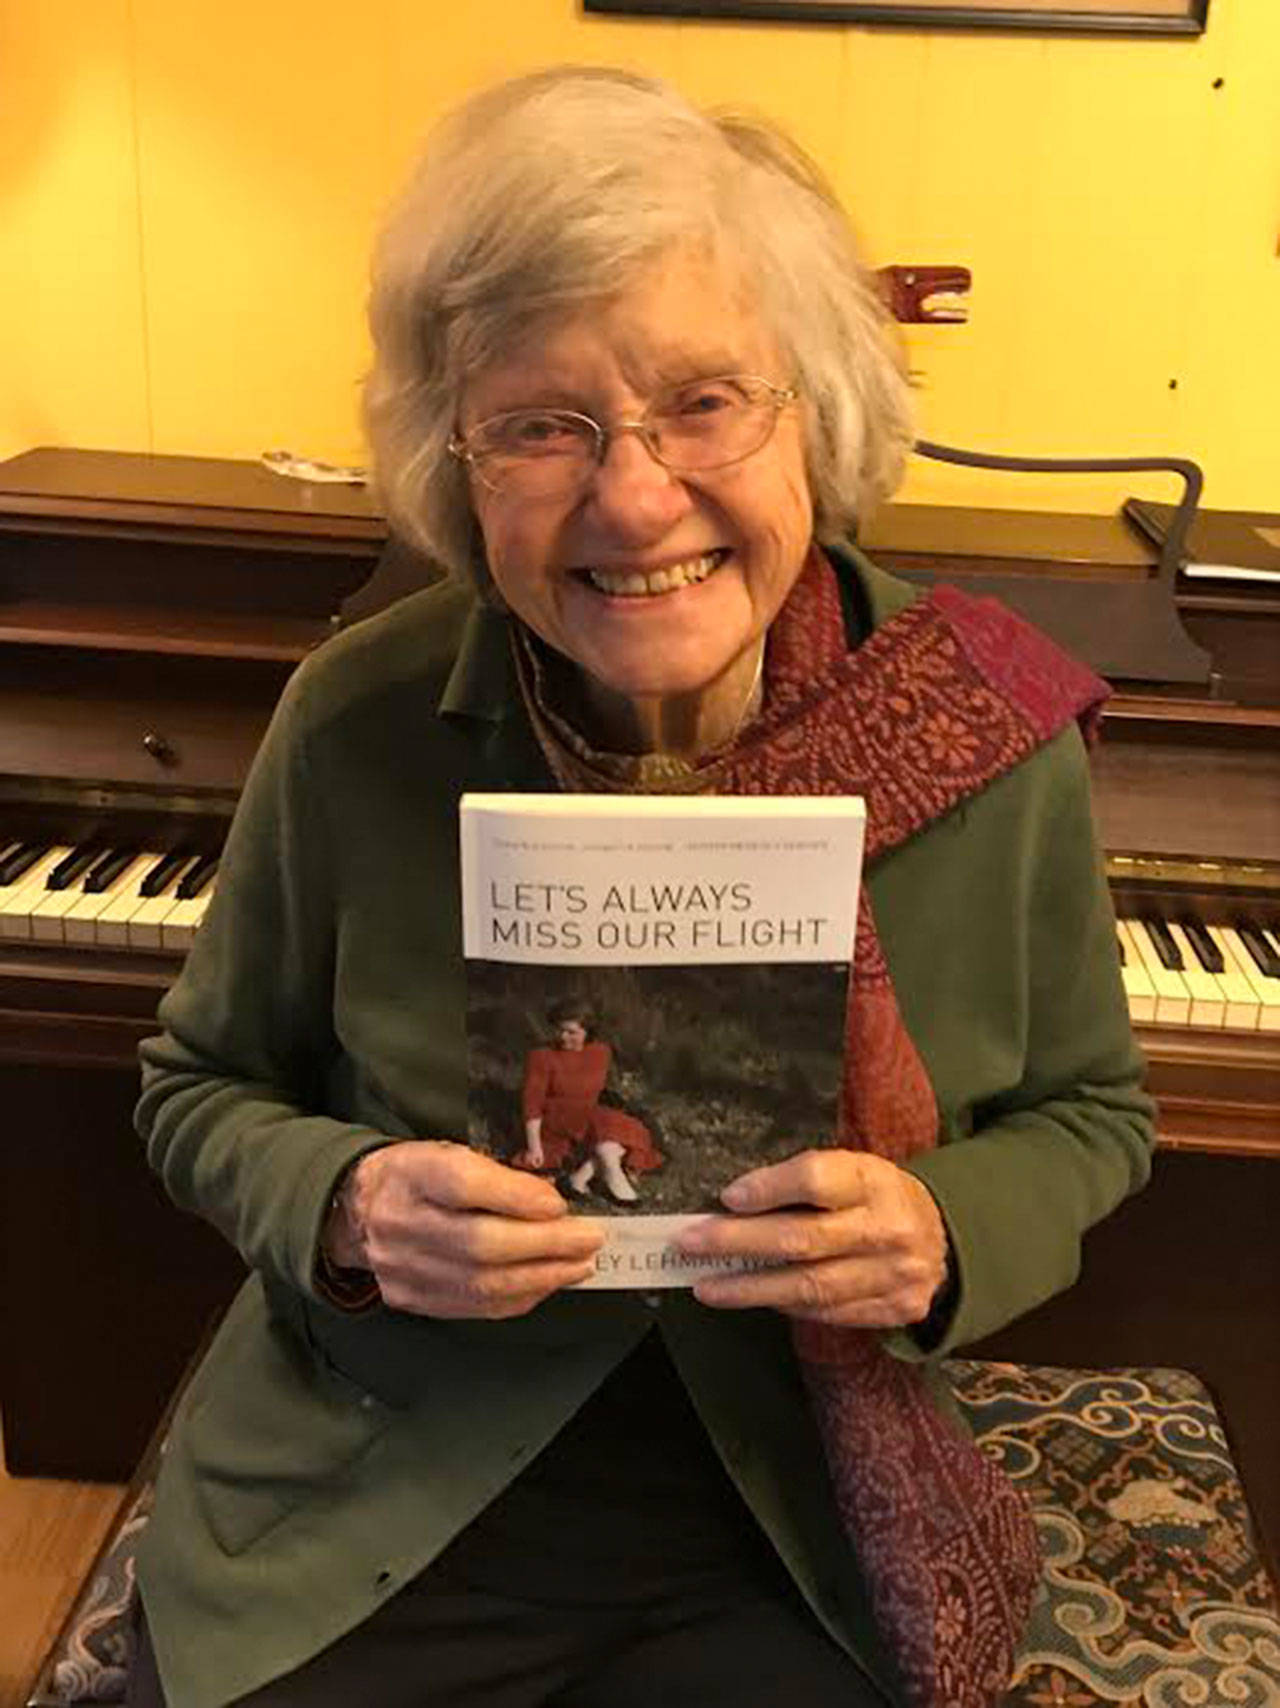 Photo courtesy of Beverley Lehman West | Bainbridge Island writer Beverley Lehman West’s latest offering, “Let’s Always Miss Our Flight,” a memoir in poetry, is now available at Eagle Harbor Book Company.